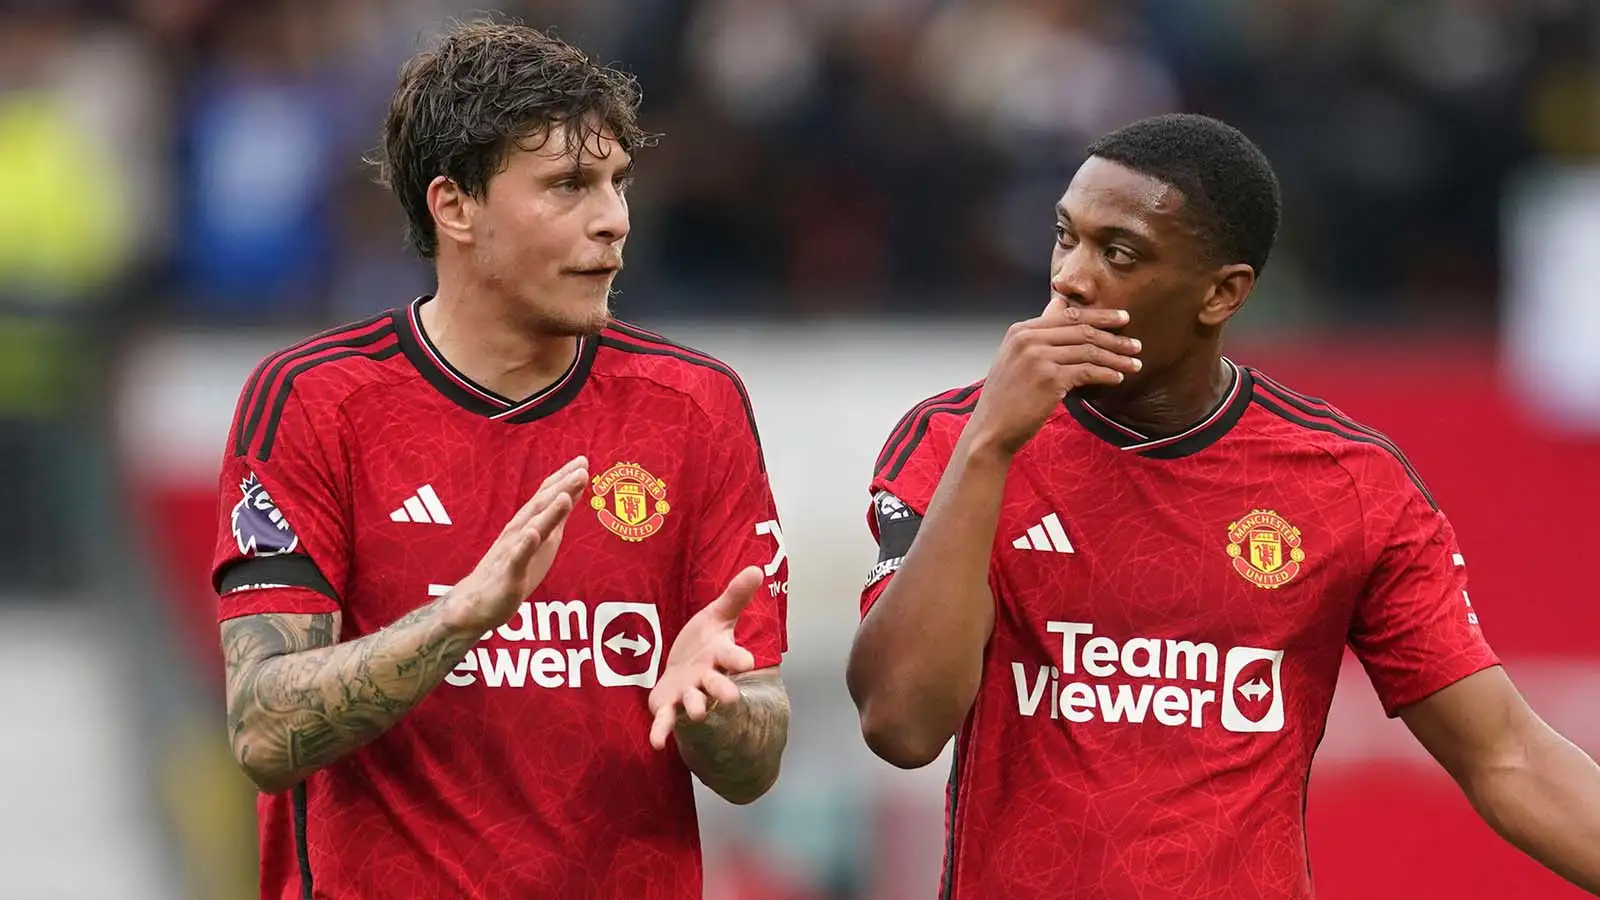 Manchester United's Victor Lindelof, left, and Anthony Martial